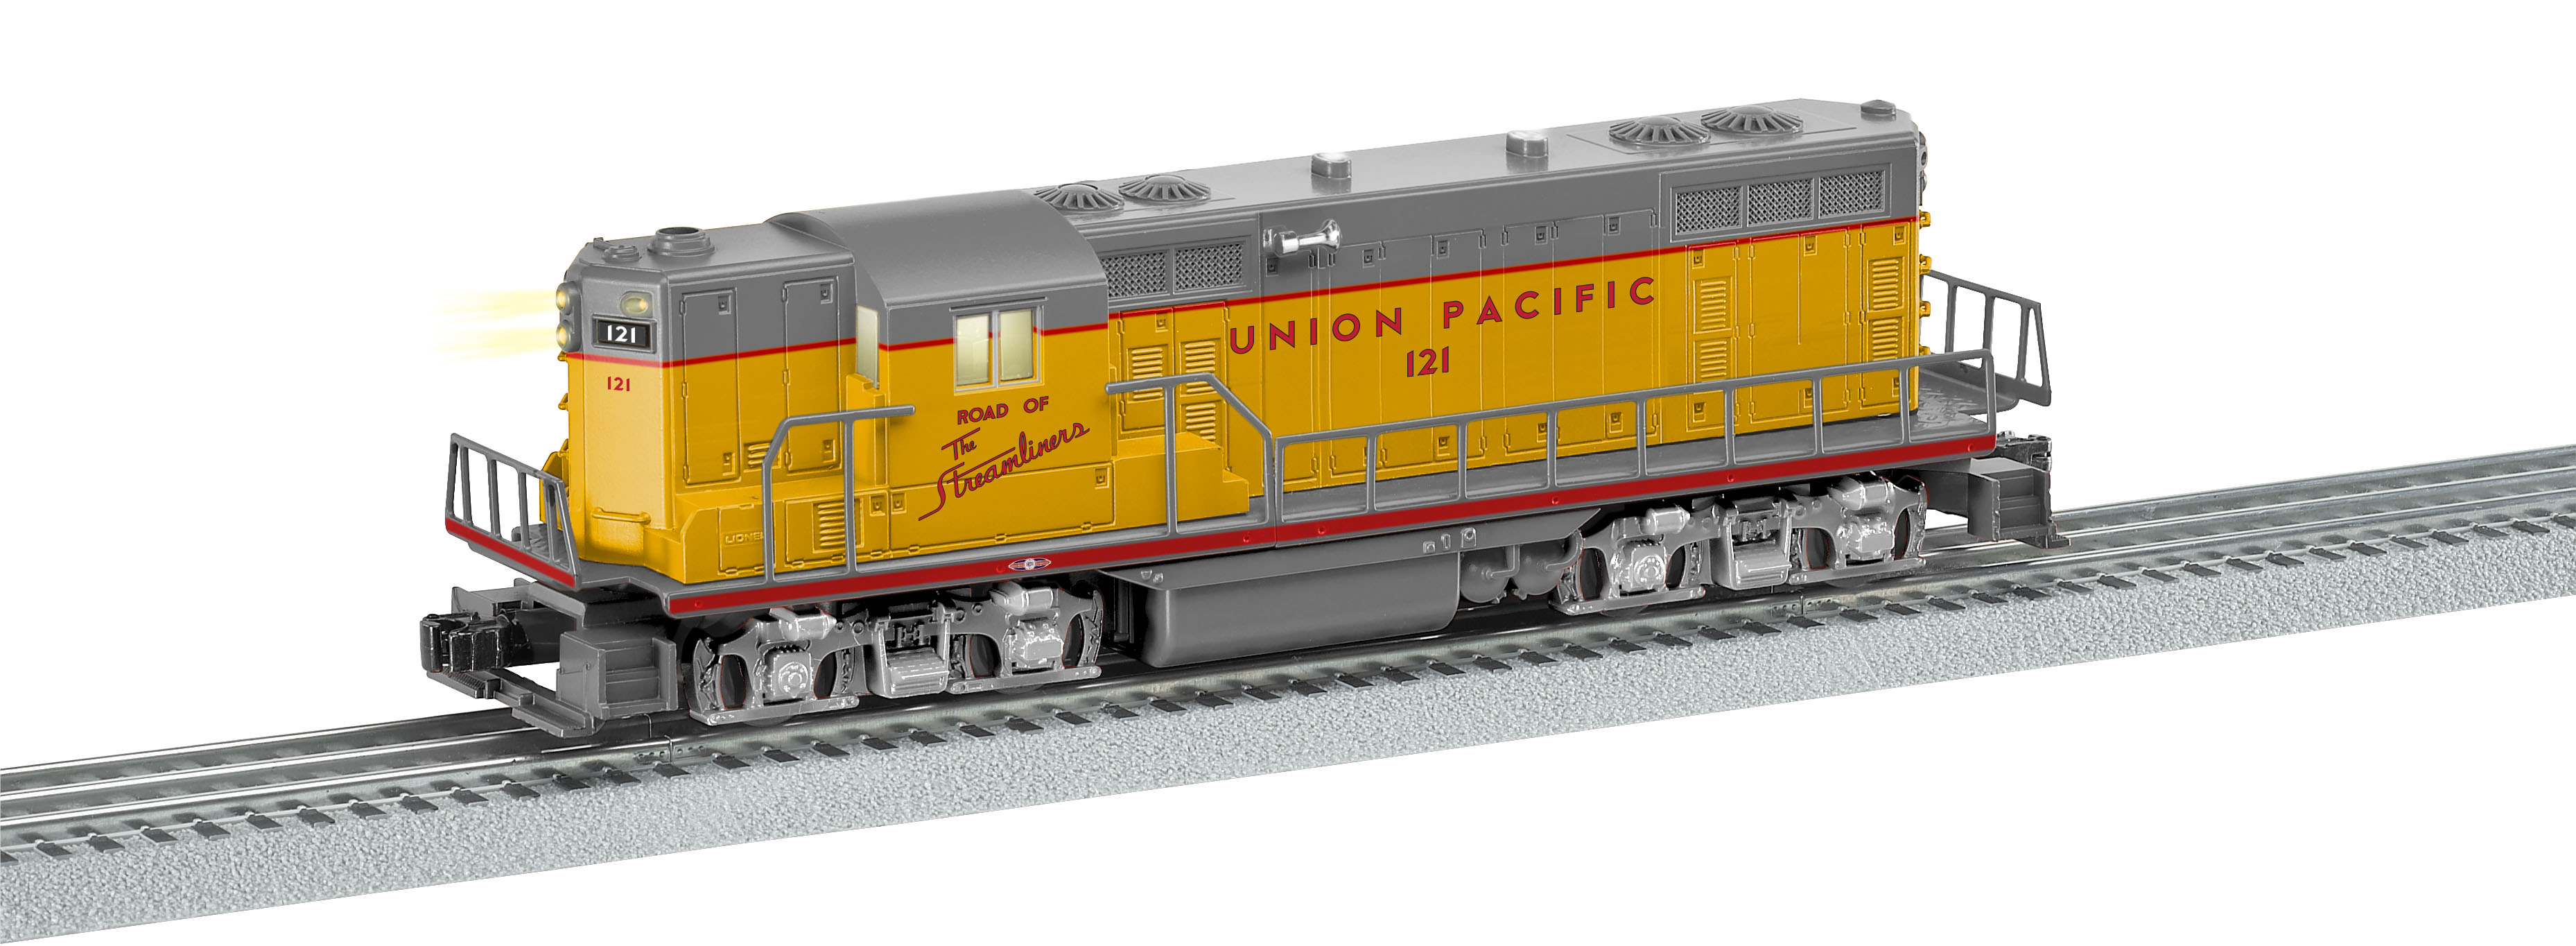 Lionel Made for Sears 18553 Union Pacific Gp-9 for sale online 